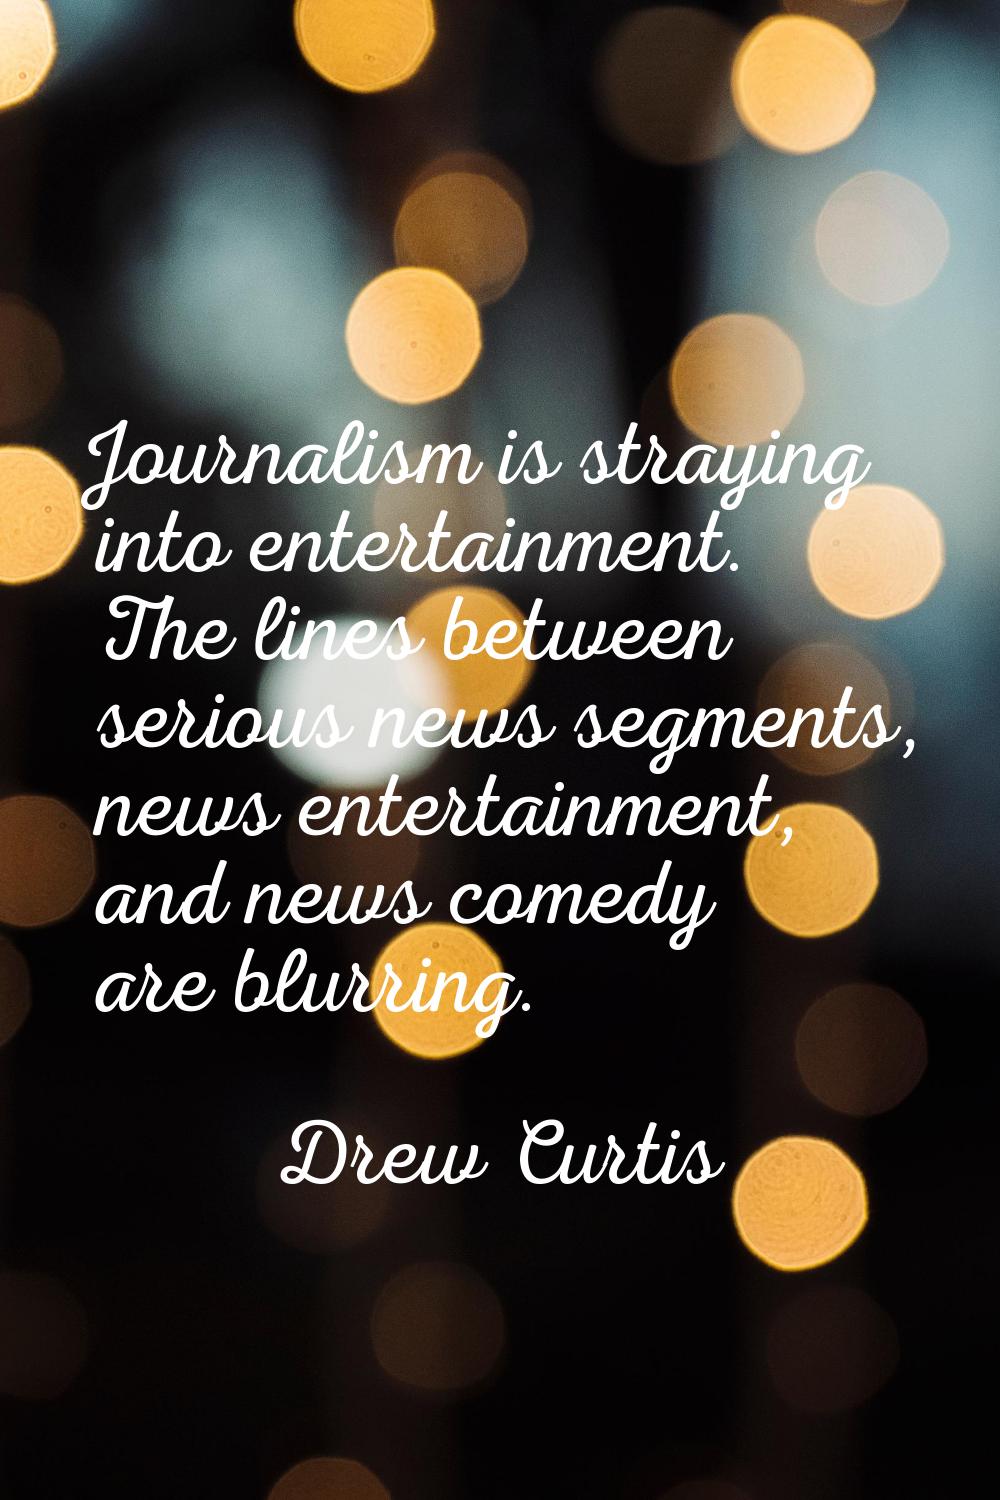 Journalism is straying into entertainment. The lines between serious news segments, news entertainm